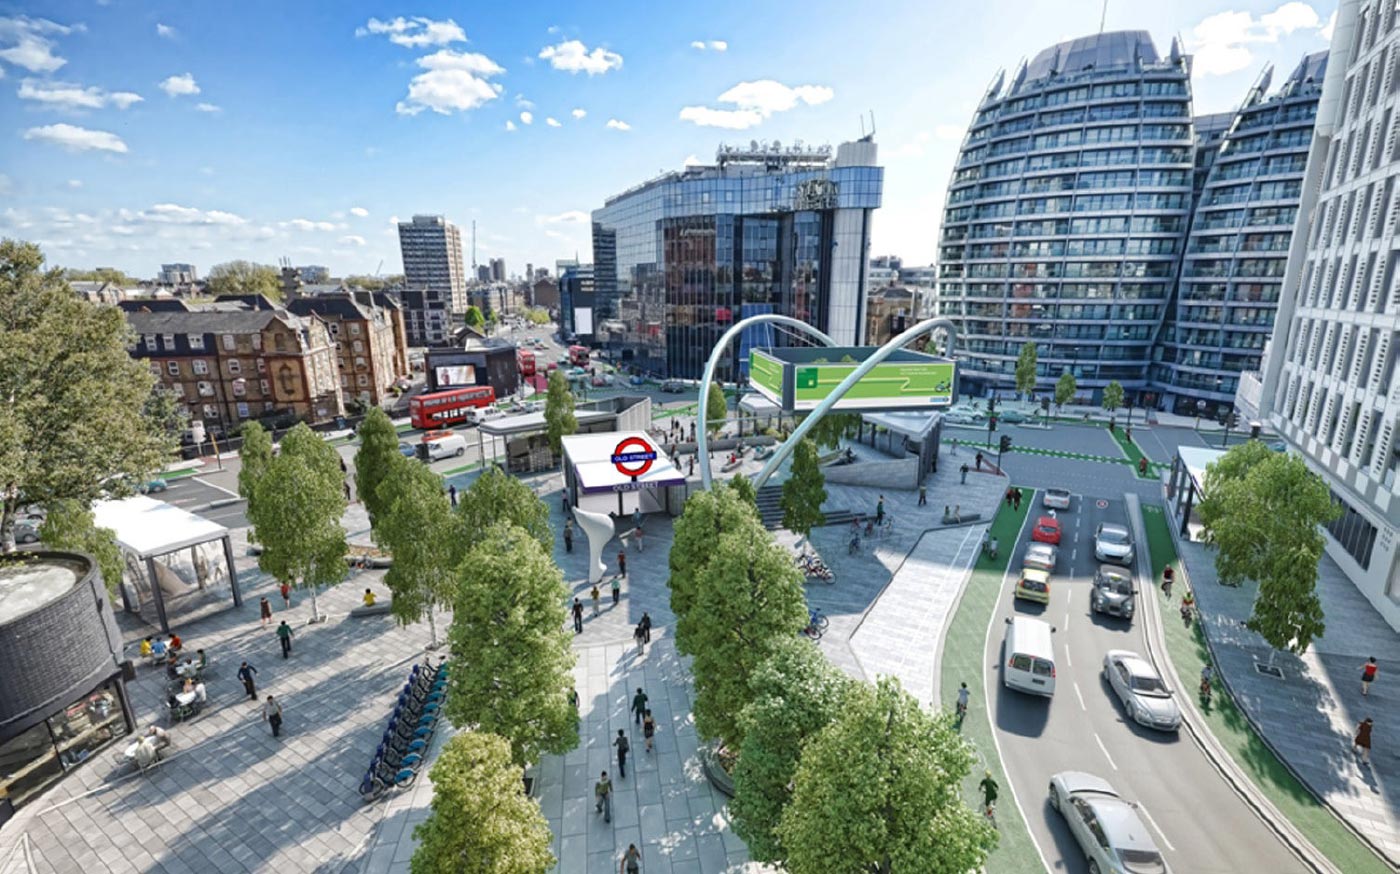 One of the four shortlisted designs – Gpad London’s proposal for the redevelopment of Old Street Roundabout and station.